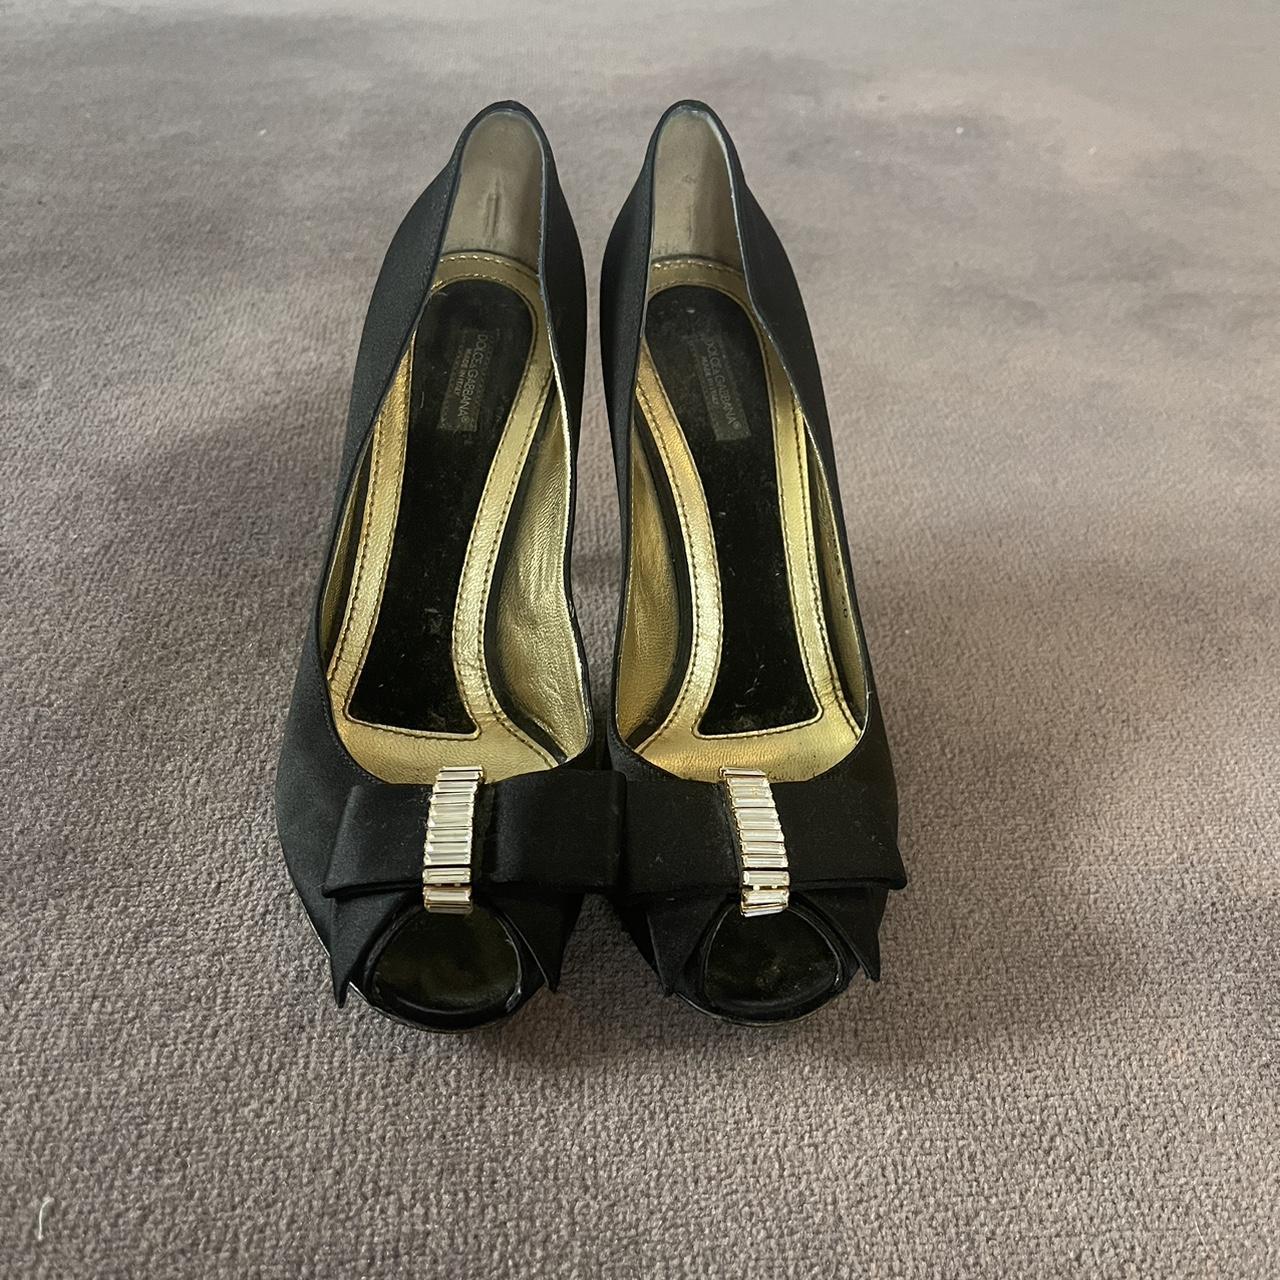 Dolce and Gabbana shows size 7.5 - Depop